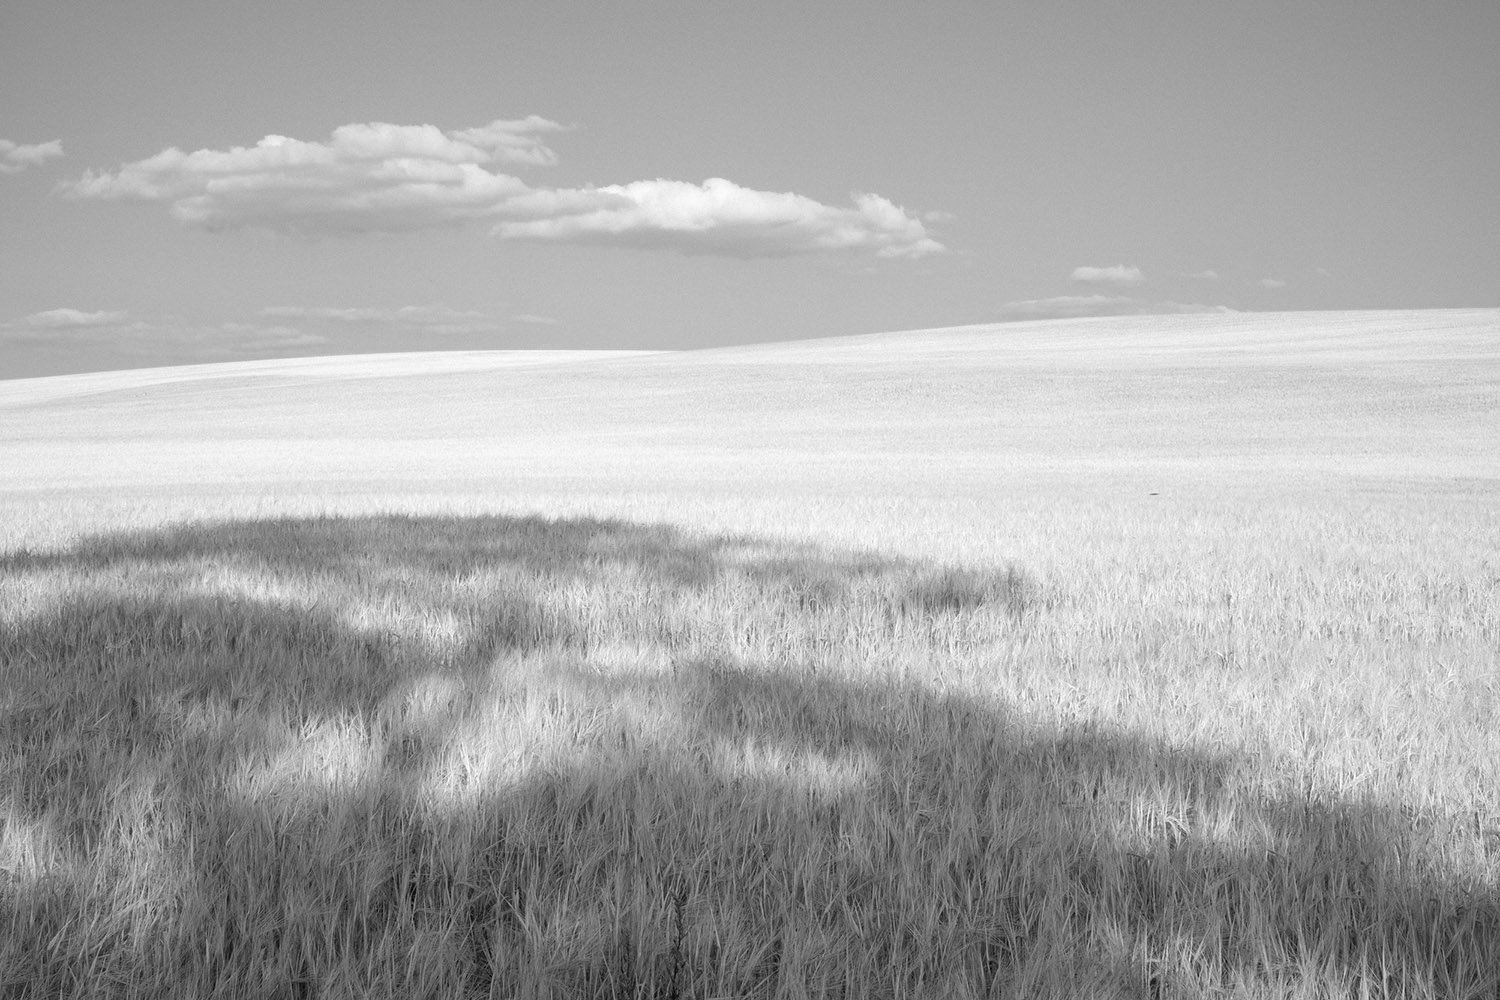 A black and white capture of the wheat fields